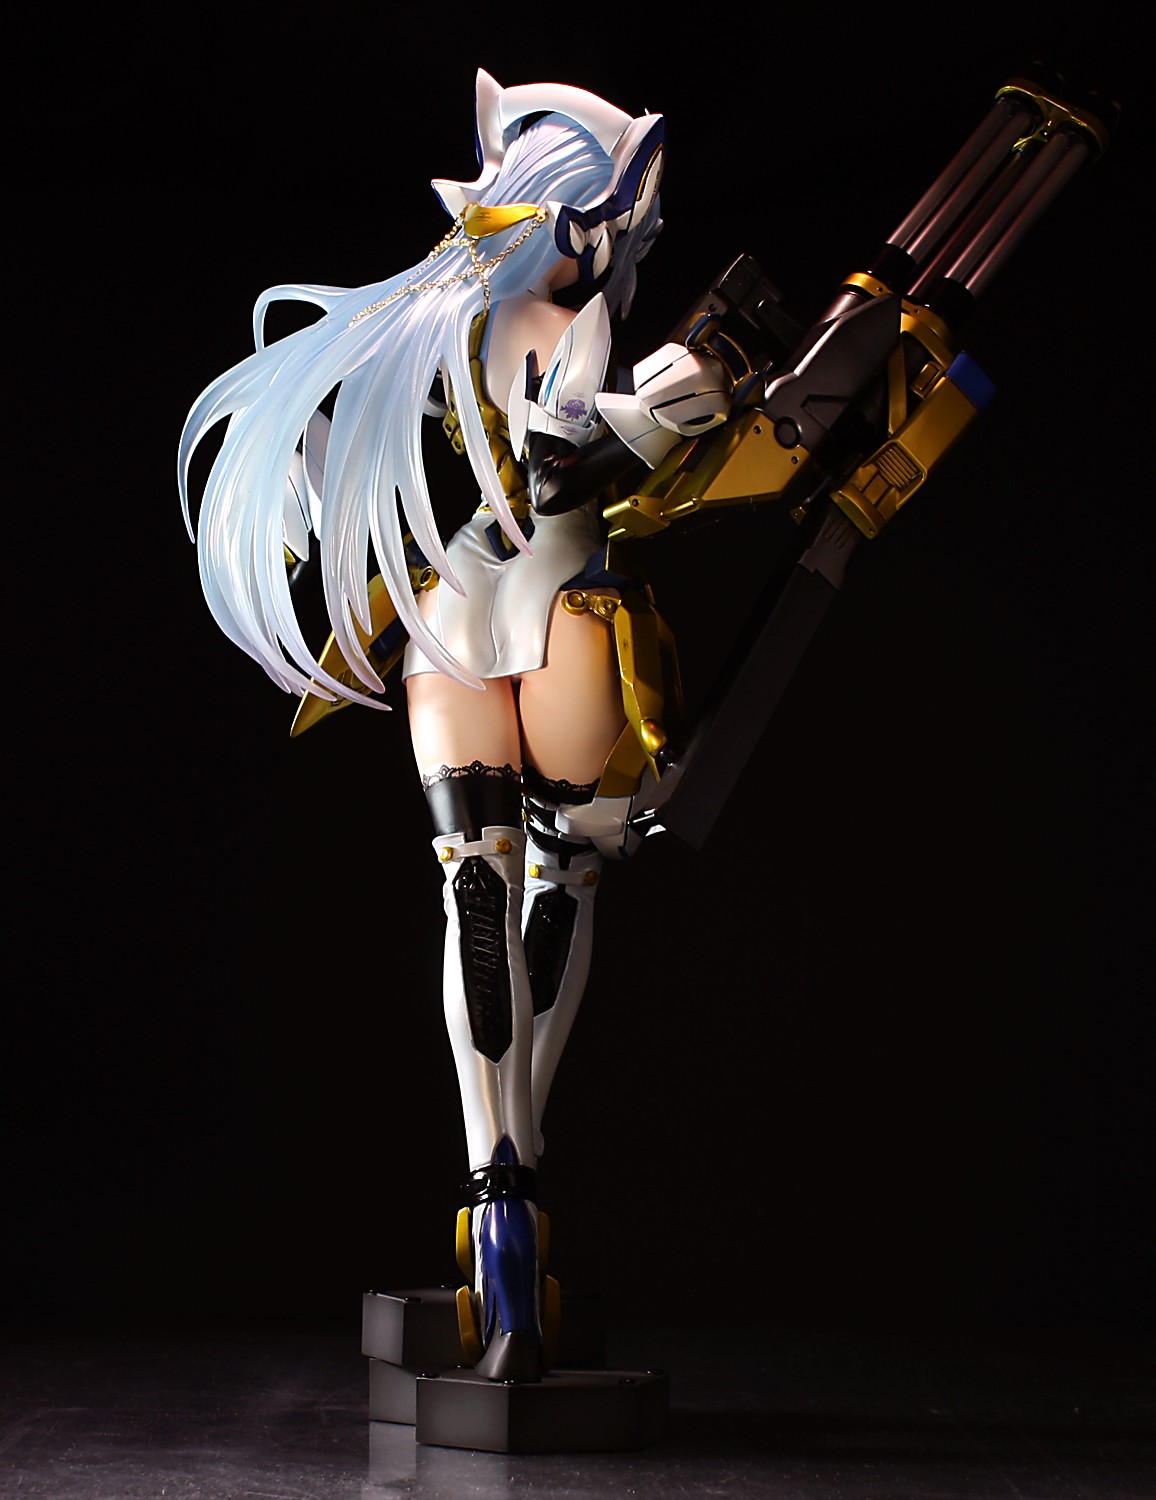 This KOS-MOS Figure Looks Awesome - Game Informer